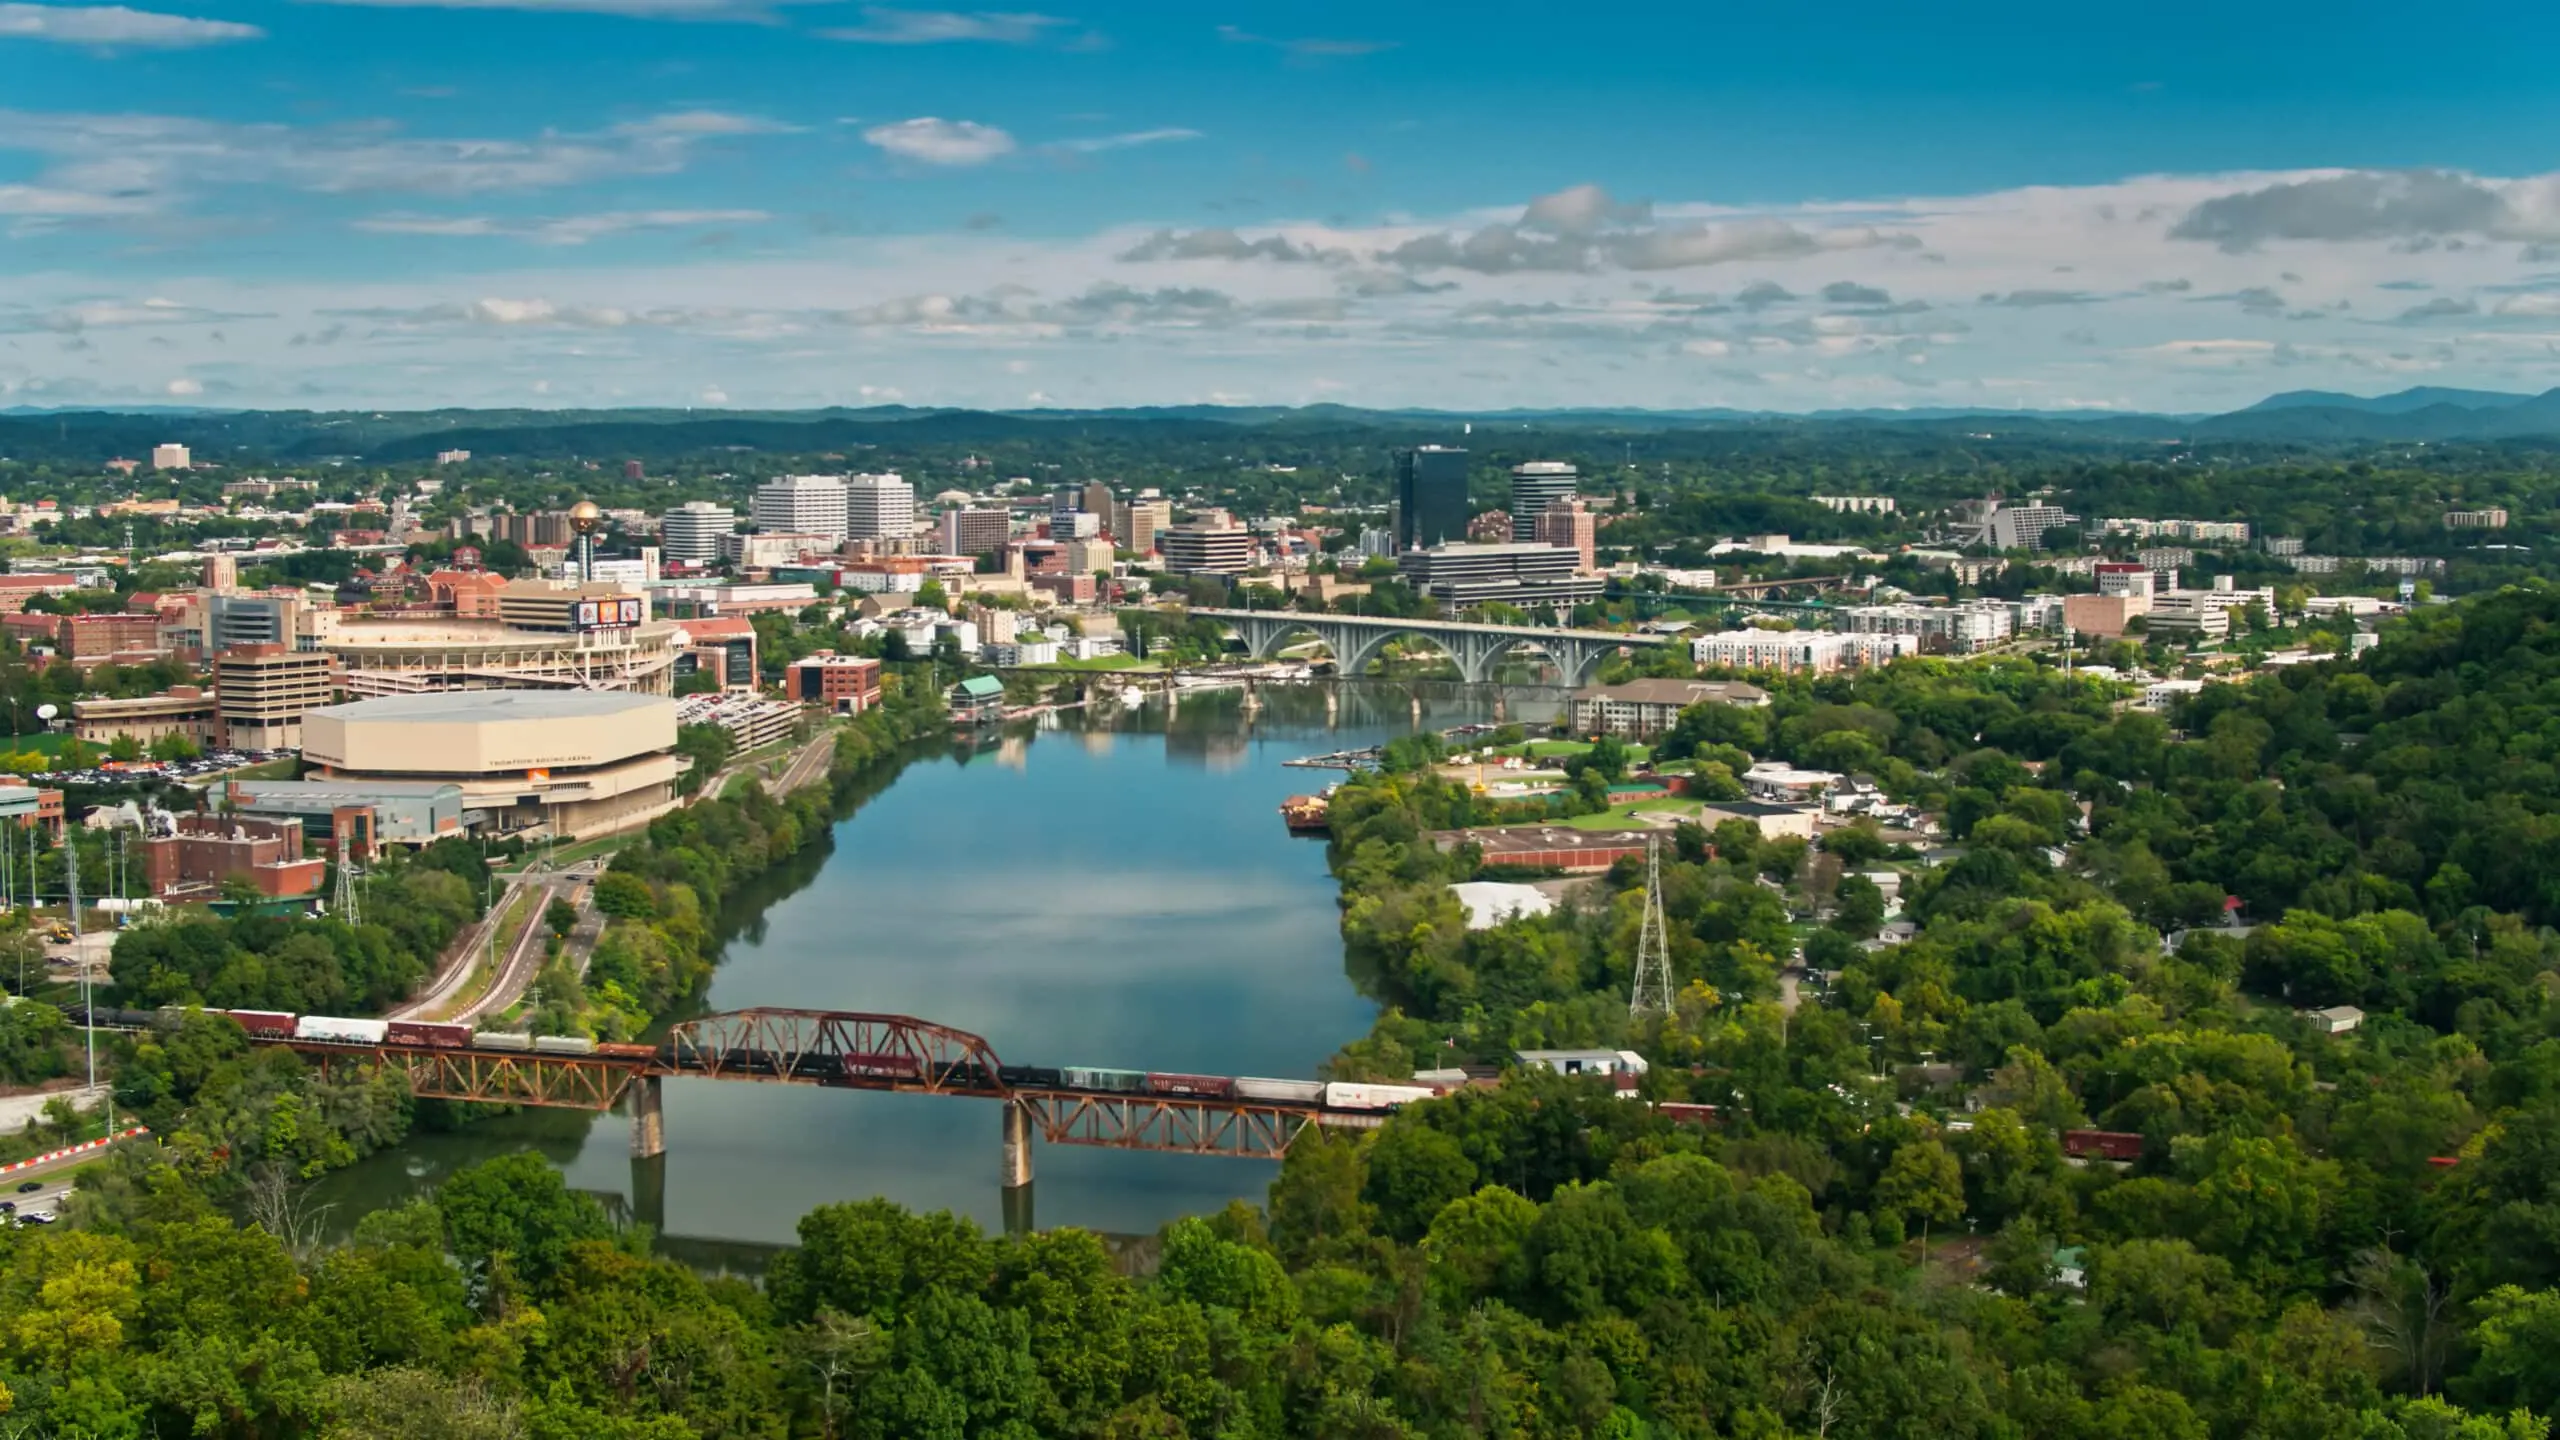 Knoxville Surrounded by Forest